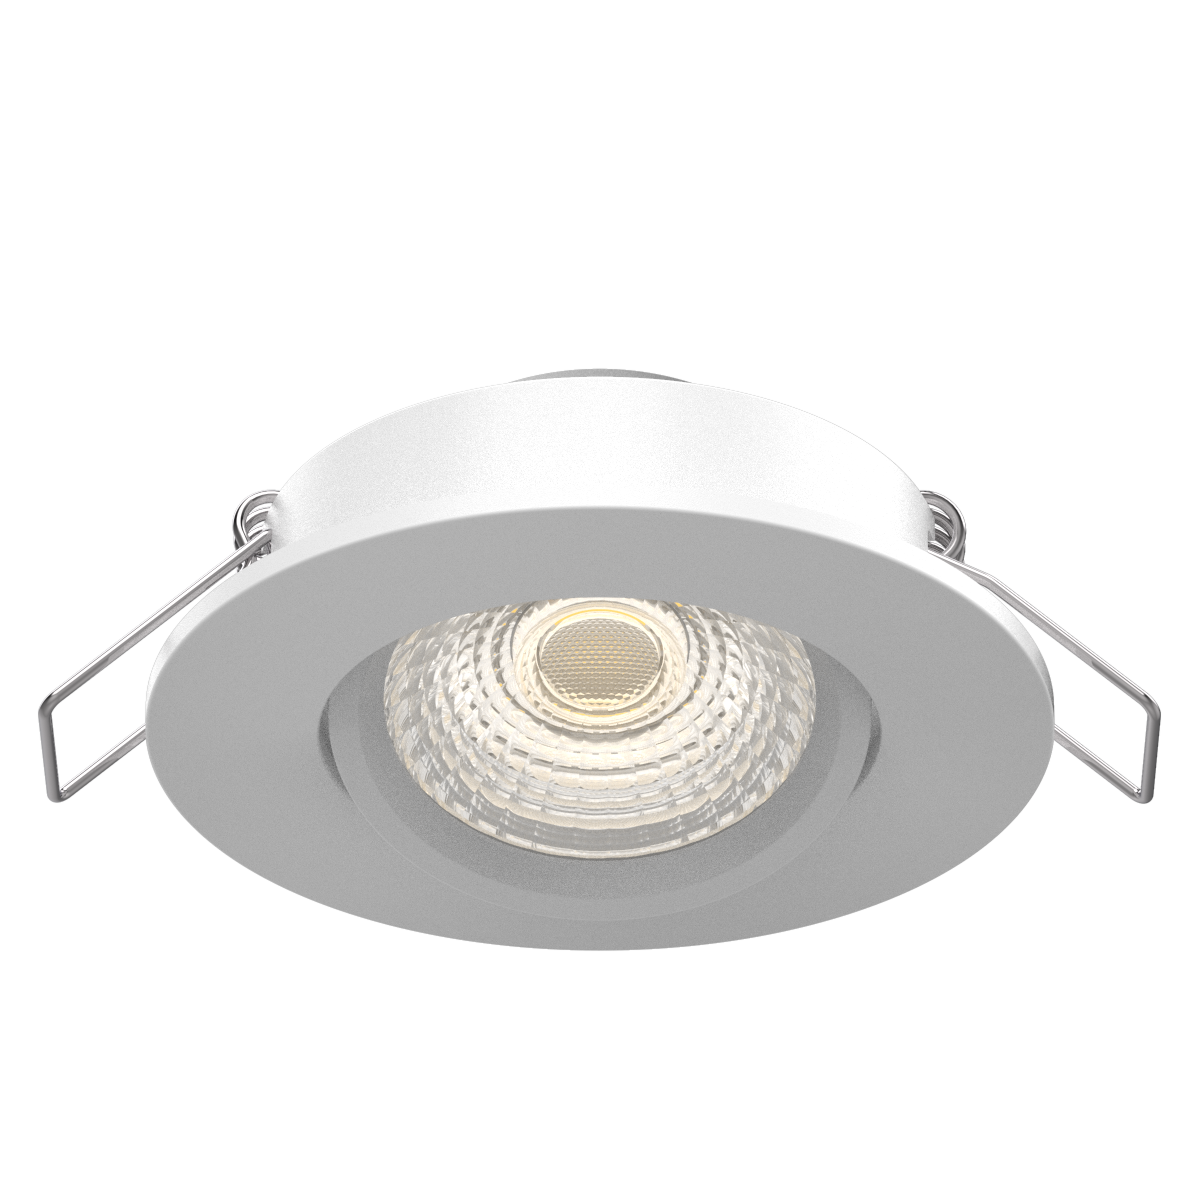 China OEM Residential Cob Led Downlight - New 7W Slim Dim to warm changeable LED Downlight-Lens Version – Radiant Lighting